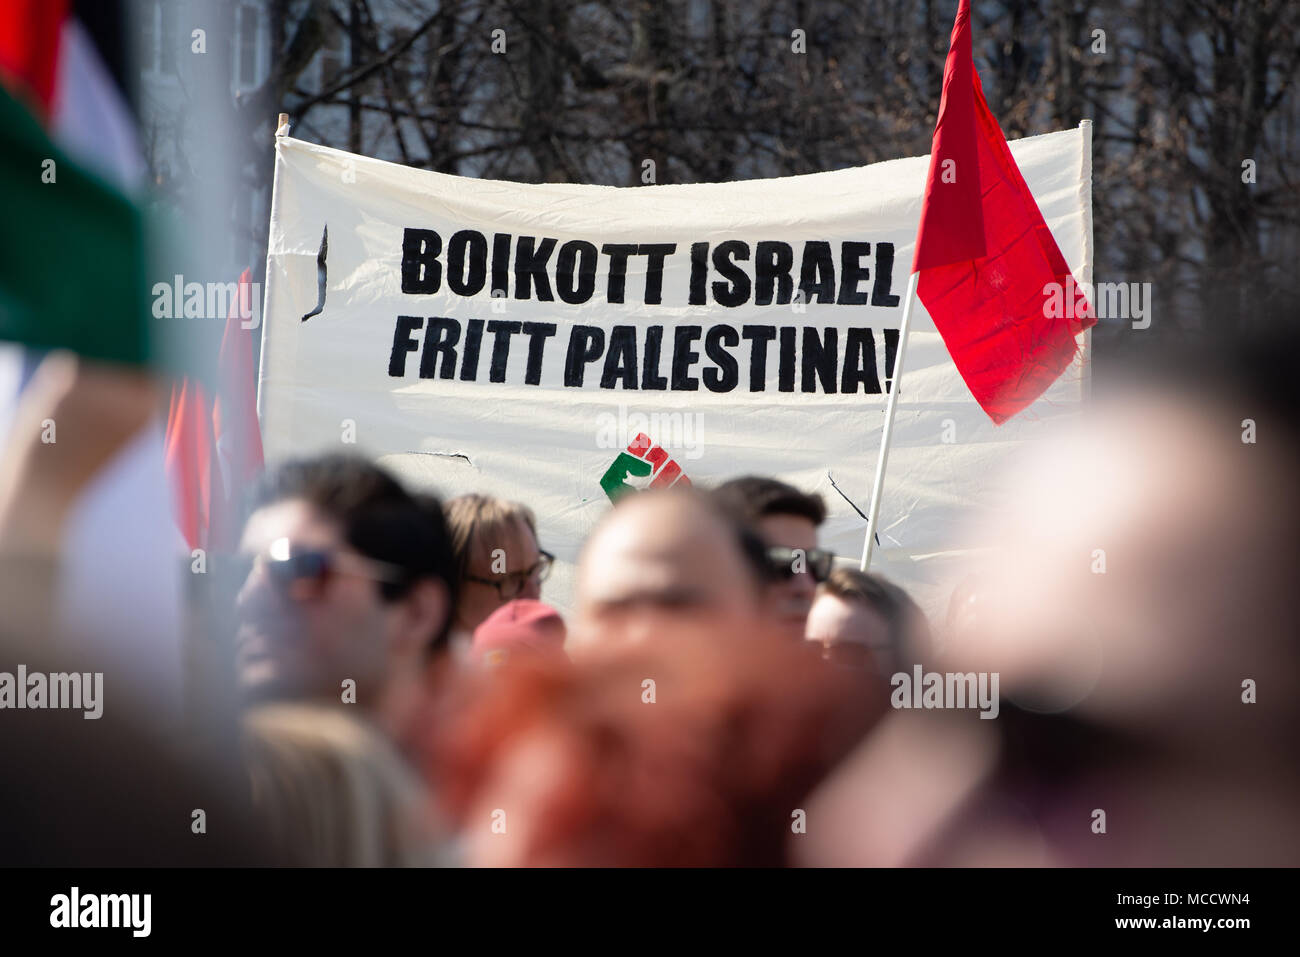 Protesters carry a sign reading 'Boycott Israel, Free Palestine!' as they march to Norway’s parliament building to protest Israel's shooting of Palestinians in Gaza. Oslo, April 14, 2018. Stock Photo